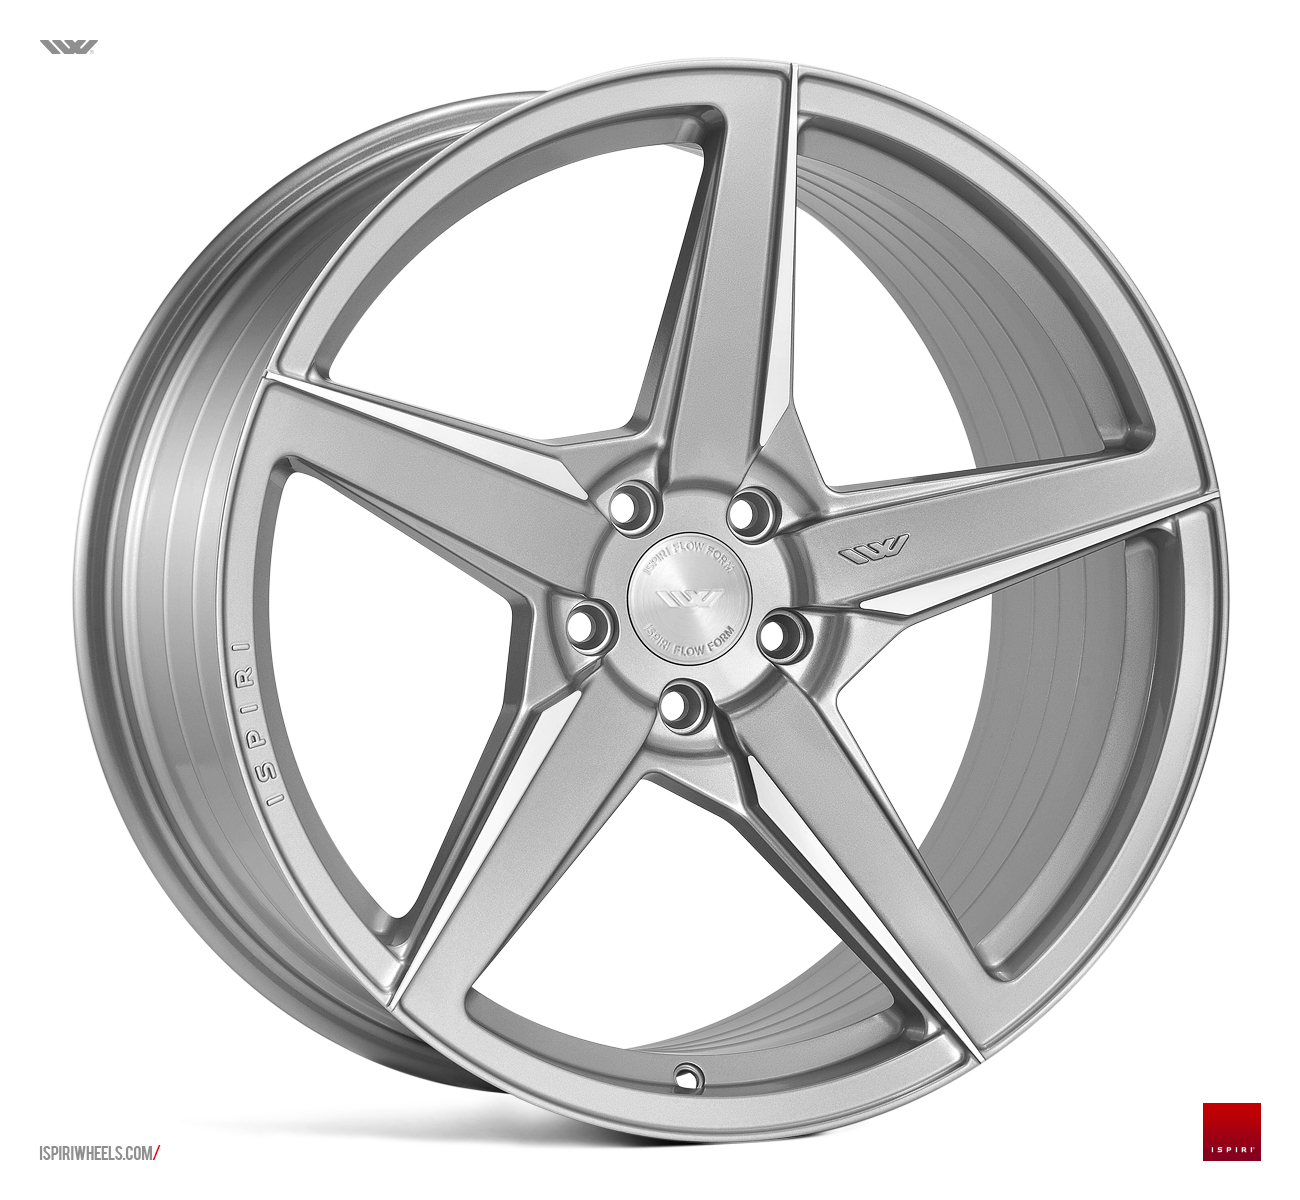 NEW 21  ISPIRI FFR5 5 SPOKE ALLOY WHEELS IN PURE SILVER BRUSHED  WITH WIDER 10 5  REAR